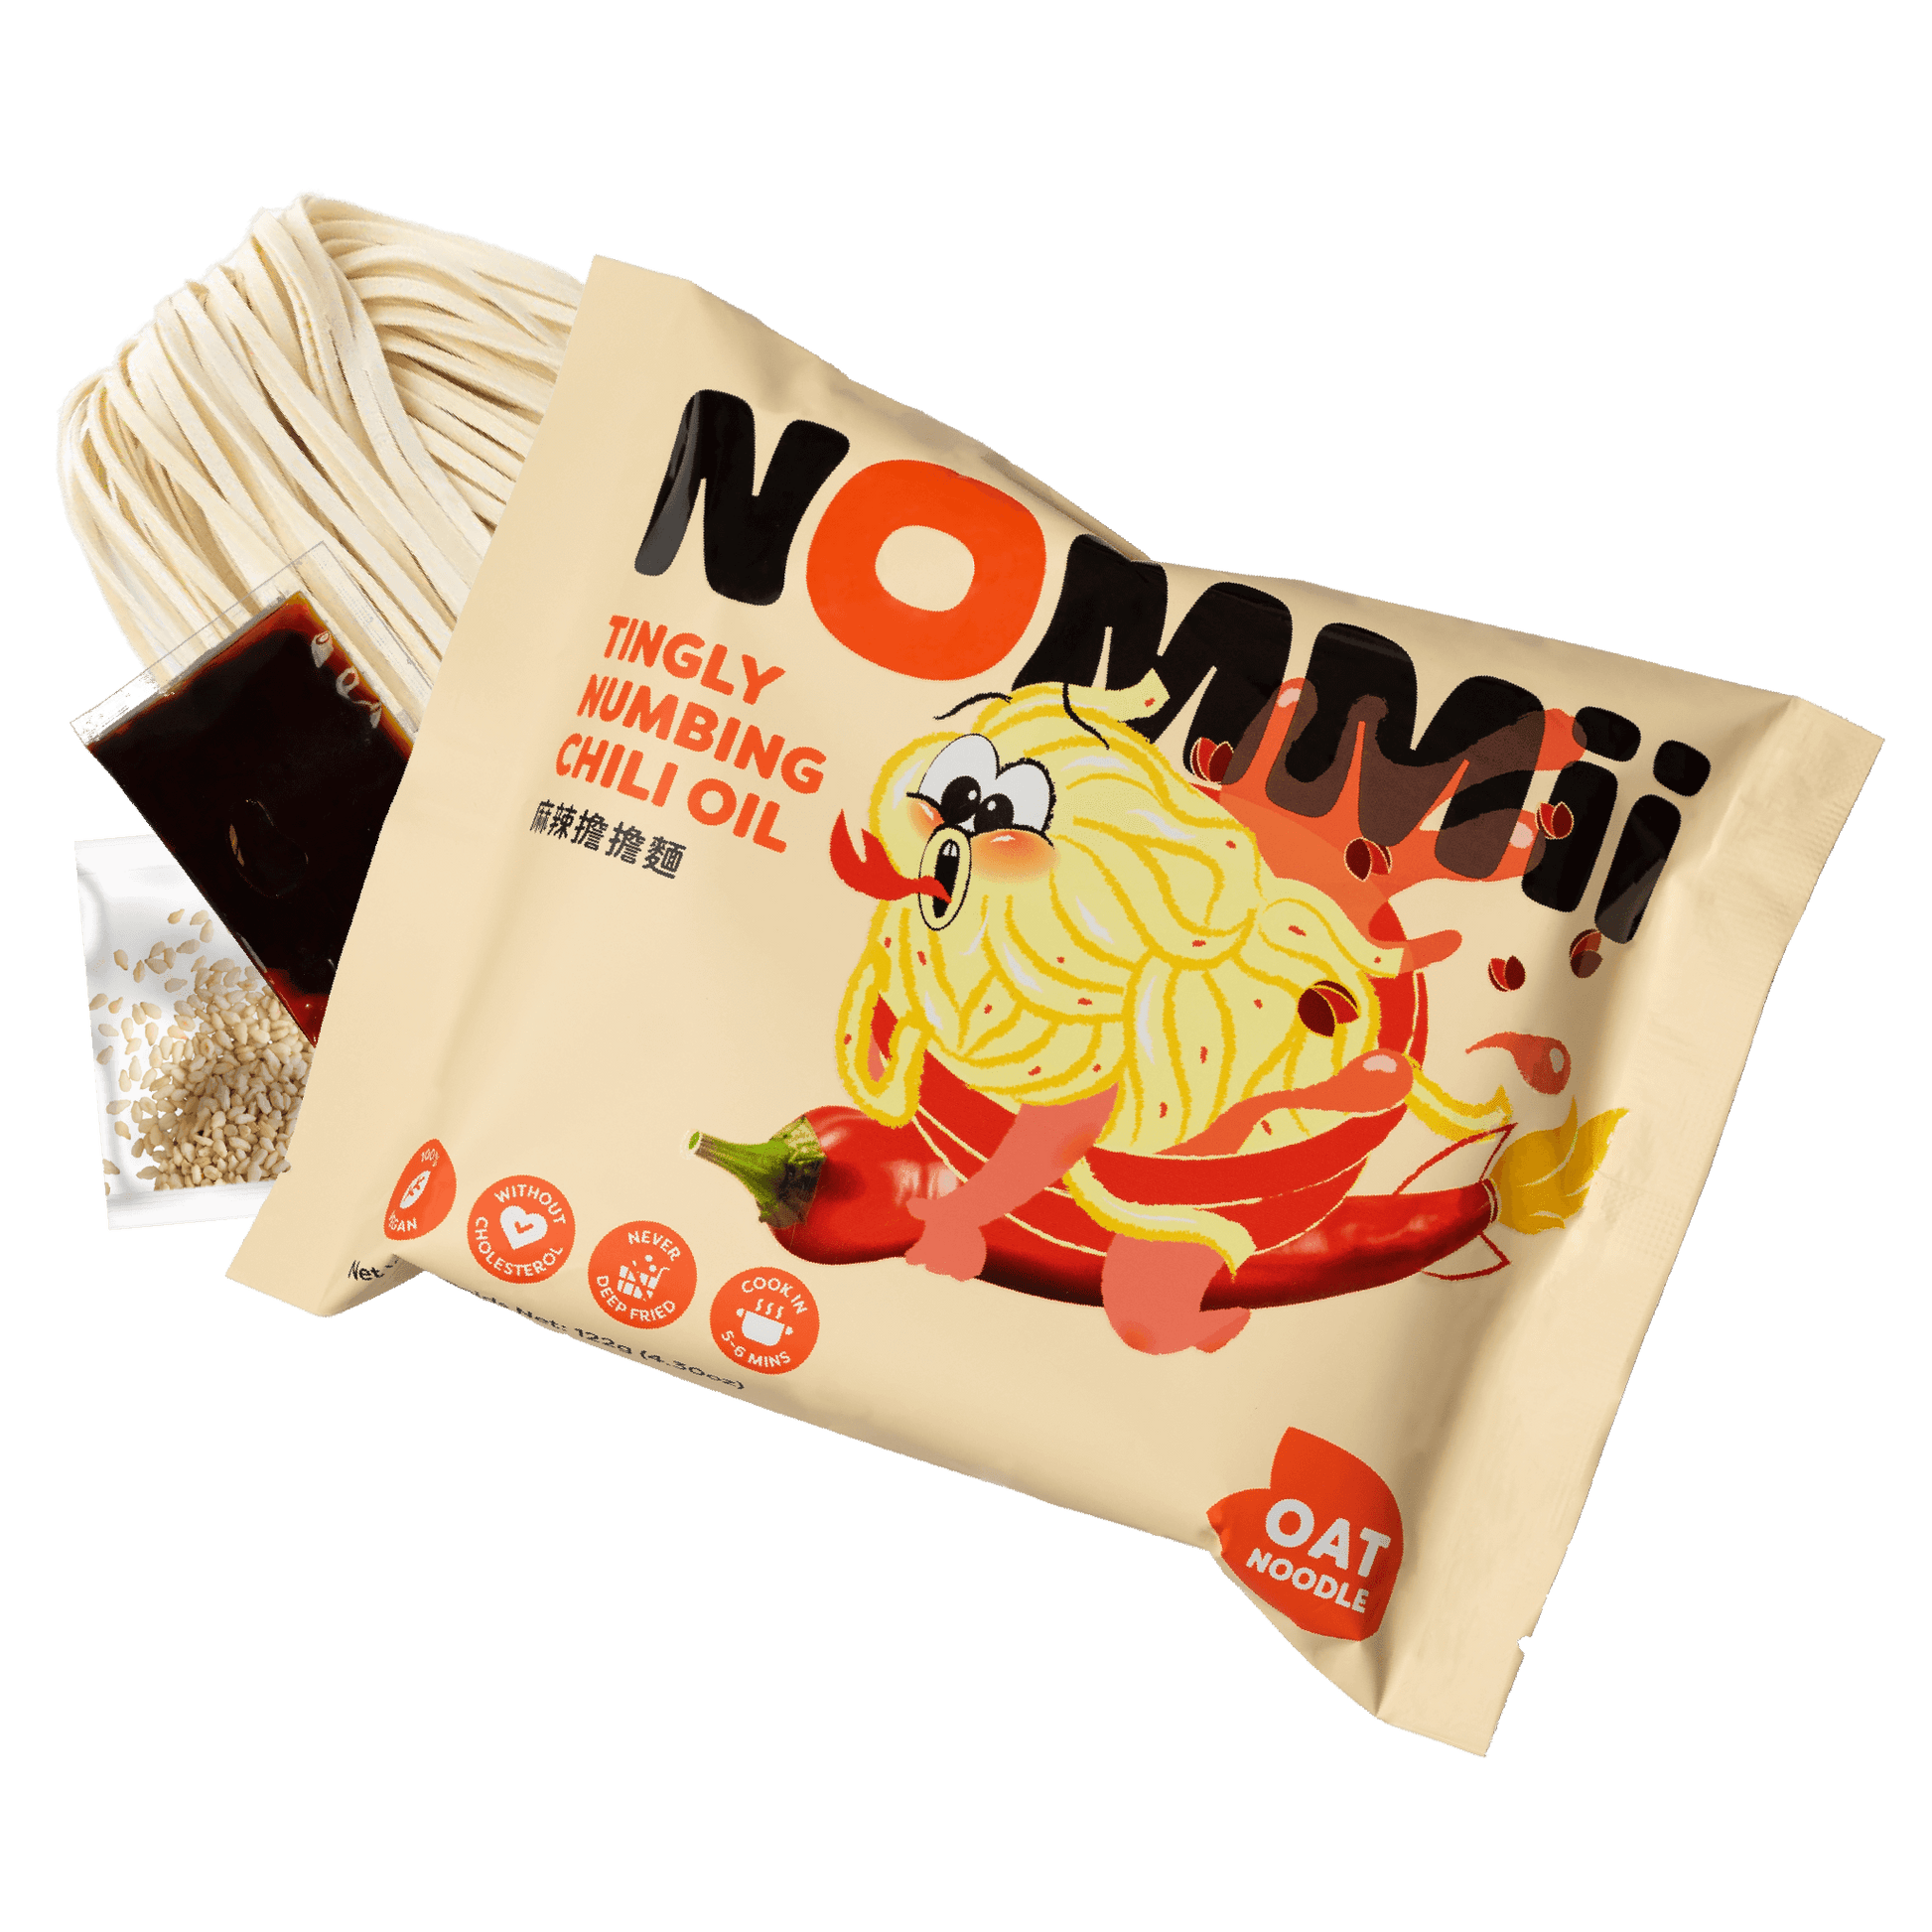 [Preorder] Tingly Numbing Chili Oil Oat Noodles (8-Pack) - NOMMii